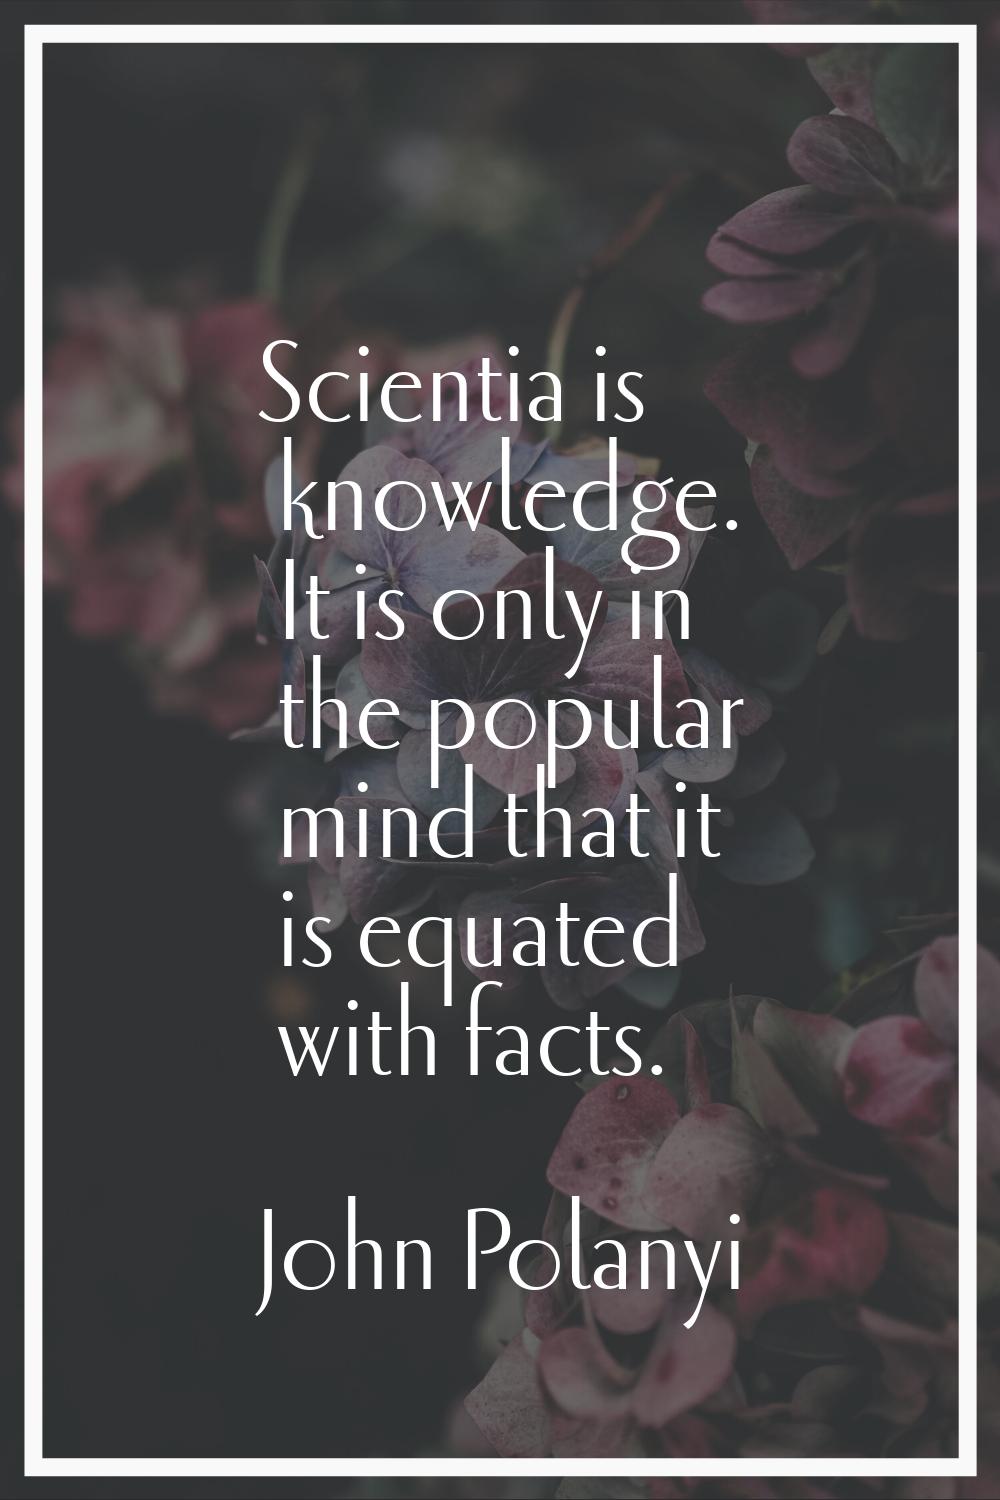 Scientia is knowledge. It is only in the popular mind that it is equated with facts.